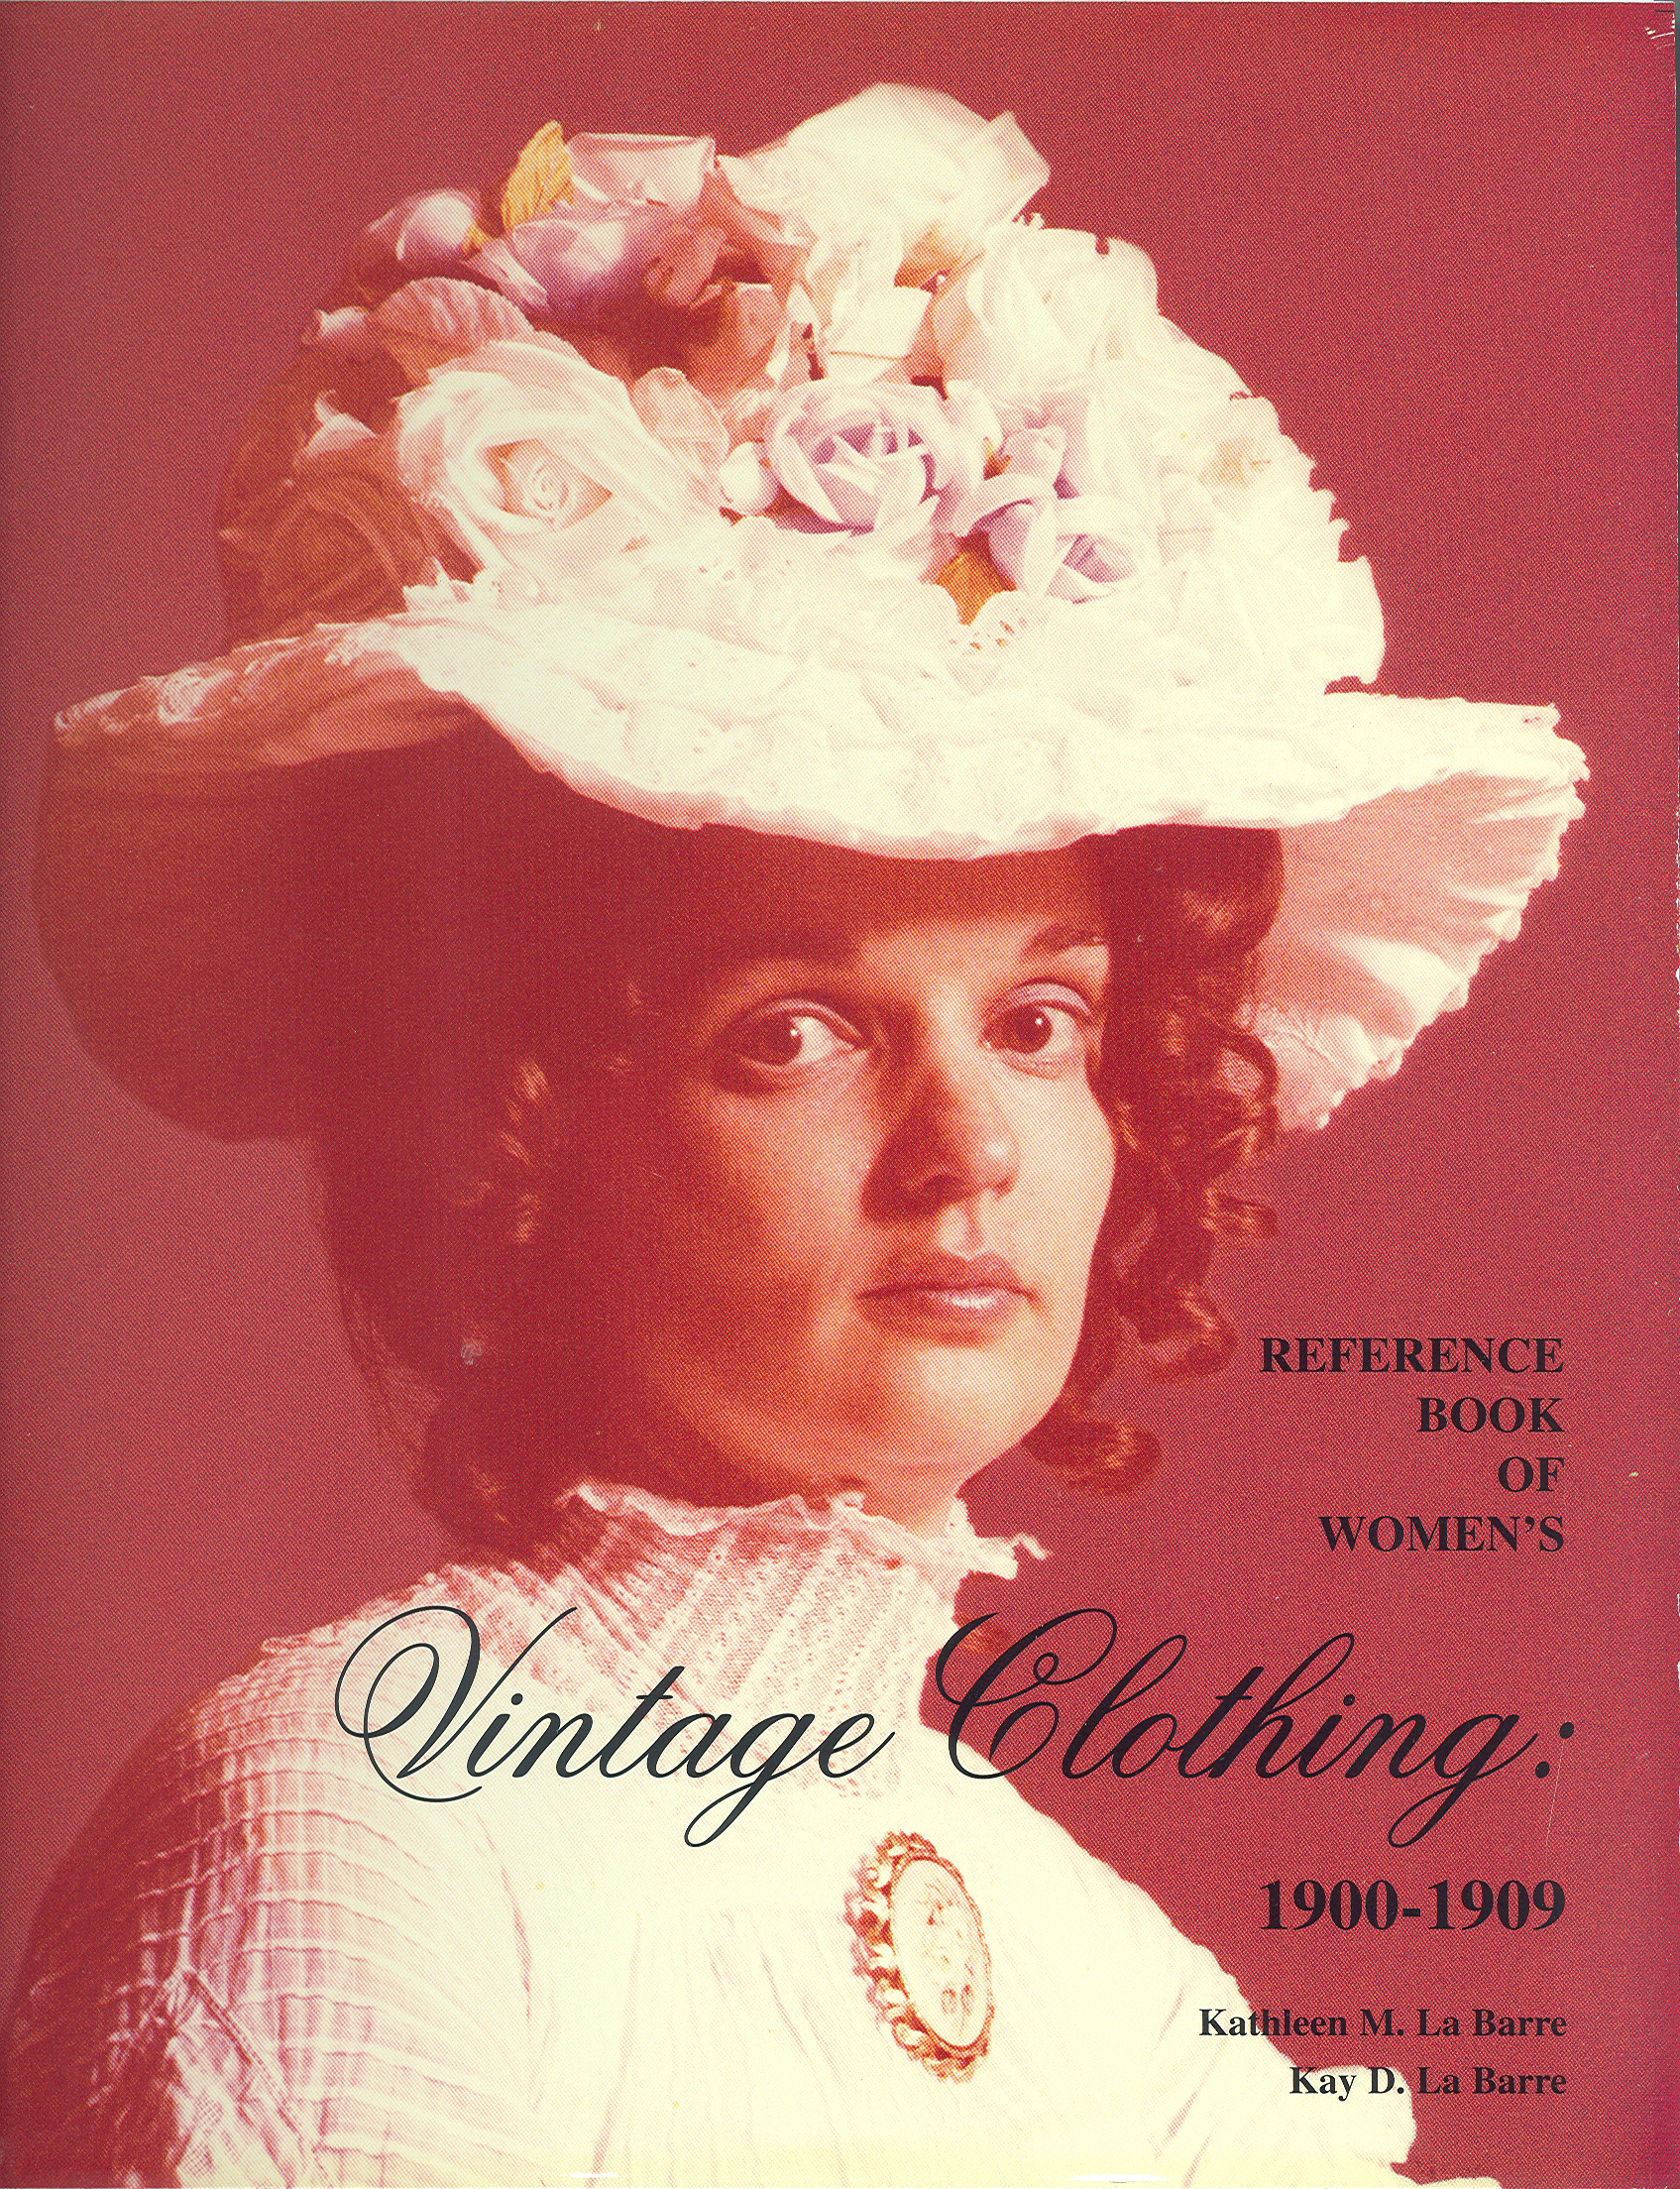 Reference Book of Women's Vintage Clothing: 1900-1909